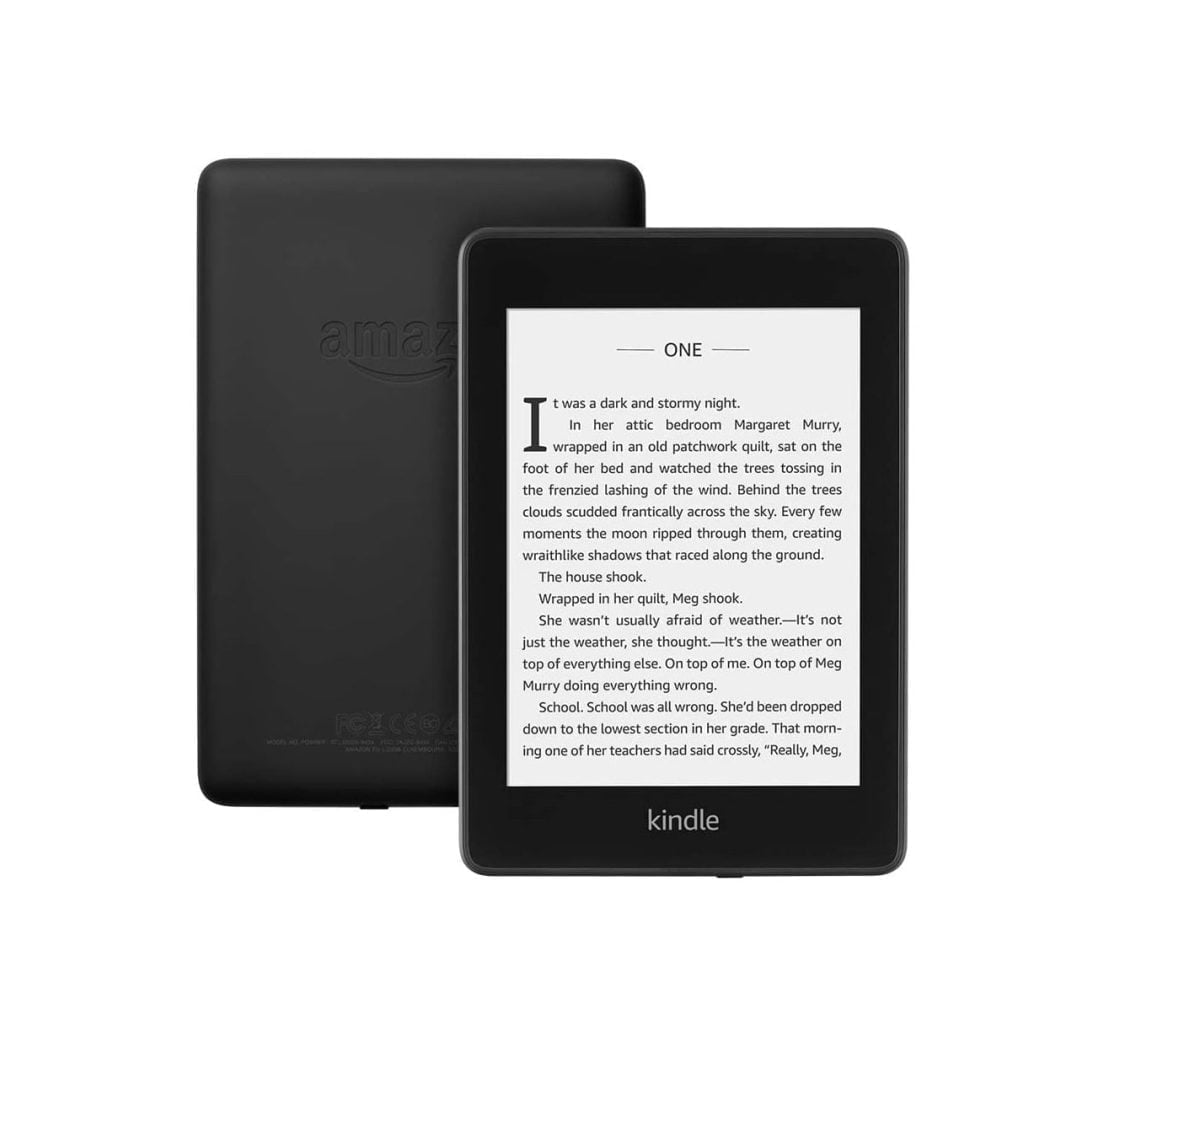 61Eaq6Gg Xl. Ac Sl1000 Amazon &Amp;Lt;H1&Amp;Gt;Kindle Paperwhite (10Th Gen) - 6&Amp;Quot; High Resolution Display With Built-In Light, 32 Gb, Waterproof, Wi-Fi&Amp;Lt;/H1&Amp;Gt; &Amp;Lt;Ul Class=&Amp;Quot;A-Unordered-List A-Vertical A-Spacing-Mini&Amp;Quot;&Amp;Gt; &Amp;Lt;Li&Amp;Gt;&Amp;Lt;Span Class=&Amp;Quot;A-List-Item&Amp;Quot;&Amp;Gt;The Thinnest, Lightest Kindle Paperwhite Yet—With A Flush-Front Design And 300 Ppi Glare-Free Display That Reads Like Real Paper Even In Bright Sunlight.&Amp;Lt;/Span&Amp;Gt;&Amp;Lt;/Li&Amp;Gt; &Amp;Lt;Li&Amp;Gt;&Amp;Lt;Span Class=&Amp;Quot;A-List-Item&Amp;Quot;&Amp;Gt;Now Waterproof, So You’re Free To Read And Relax At The Beach, By The Pool, Or In The Bath.&Amp;Lt;/Span&Amp;Gt;&Amp;Lt;/Li&Amp;Gt; &Amp;Lt;Li&Amp;Gt;&Amp;Lt;Span Class=&Amp;Quot;A-List-Item&Amp;Quot;&Amp;Gt;Browse Over 1 Million Ebooks In The Kindle Store On Amazon Us, Including Thousands Of Arabic Titles.&Amp;Lt;/Span&Amp;Gt;&Amp;Lt;/Li&Amp;Gt; &Amp;Lt;Li&Amp;Gt;&Amp;Lt;Span Class=&Amp;Quot;A-List-Item&Amp;Quot;&Amp;Gt;Now With Twice The Storage - 8Gb - Store Thousands Of Books So You Can Take Your Library With You.&Amp;Lt;/Span&Amp;Gt;&Amp;Lt;/Li&Amp;Gt; &Amp;Lt;Li&Amp;Gt;&Amp;Lt;Span Class=&Amp;Quot;A-List-Item&Amp;Quot;&Amp;Gt;The Built-In Adjustable Light Lets You Read Indoors And Outdoors, Day And Night.&Amp;Lt;/Span&Amp;Gt;&Amp;Lt;/Li&Amp;Gt; &Amp;Lt;Li&Amp;Gt;&Amp;Lt;Span Class=&Amp;Quot;A-List-Item&Amp;Quot;&Amp;Gt;A Single Battery Charge Lasts Weeks, Not Hours.&Amp;Lt;/Span&Amp;Gt;&Amp;Lt;/Li&Amp;Gt; &Amp;Lt;/Ul&Amp;Gt; Kindle Paperwhite Kindle Paperwhite (10Th Gen) 6&Amp;Quot;- 32 Gb